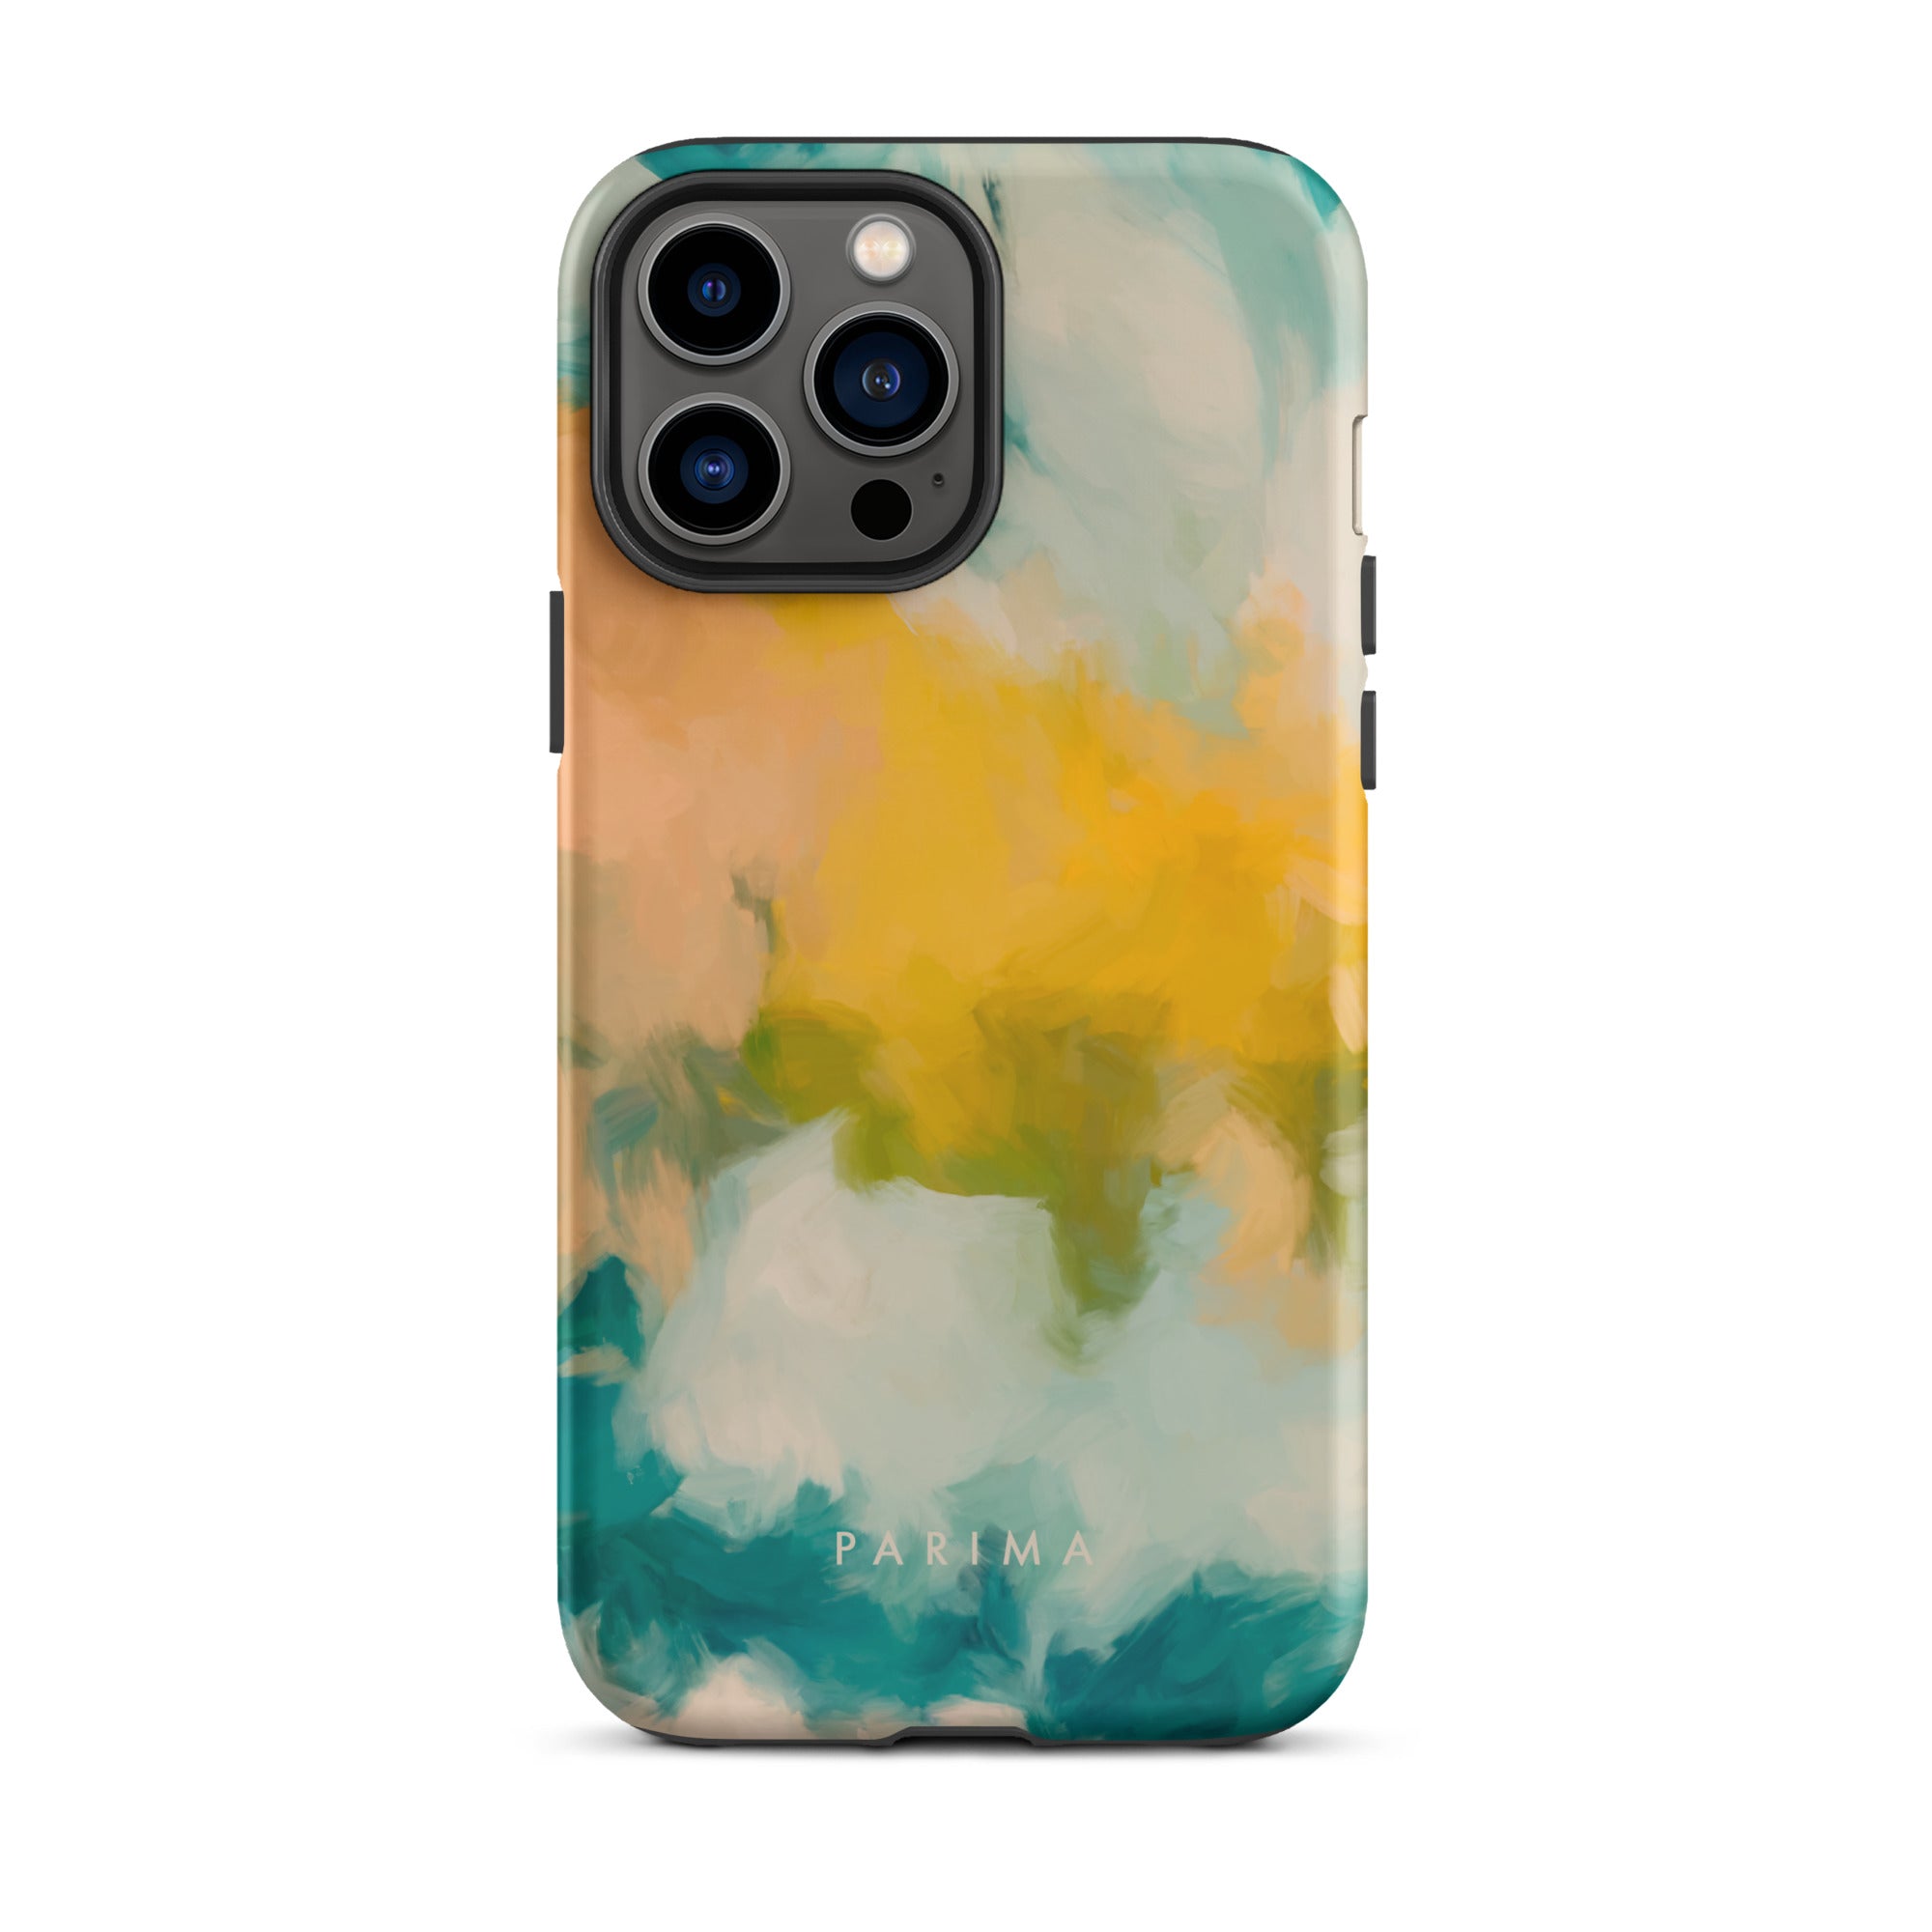 Beach Day, blue and yellow abstract art - iPhone 13 Pro Max tough case by Parima Studio